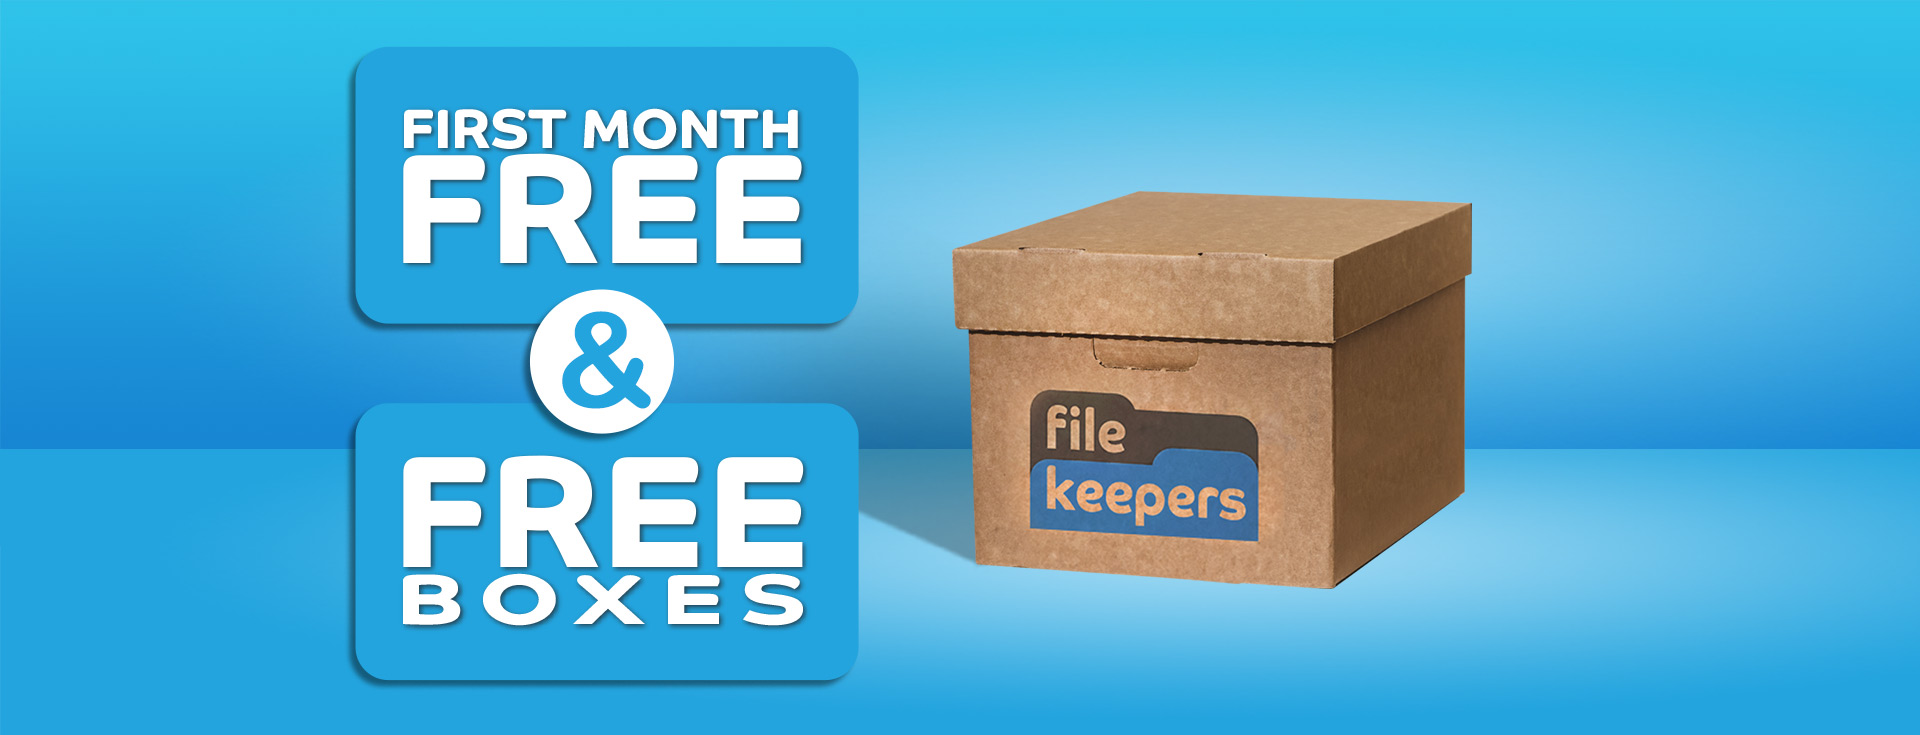 First Month FREE and FREE Boxes – File Keepers